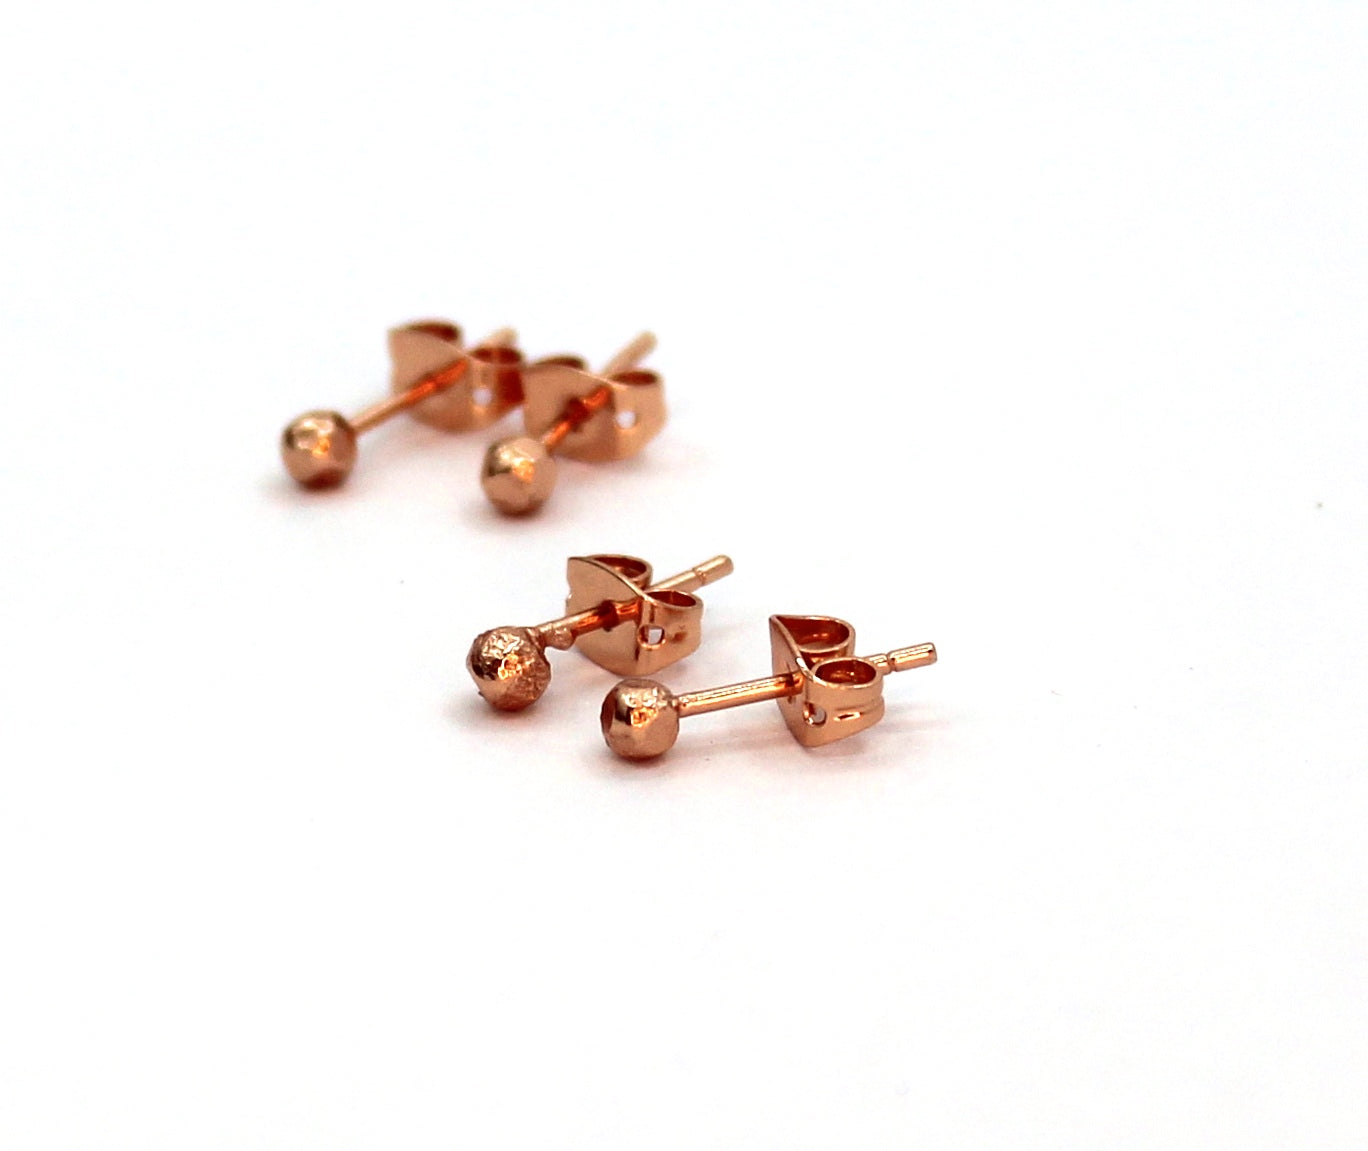 Small Faceted Copper Studs